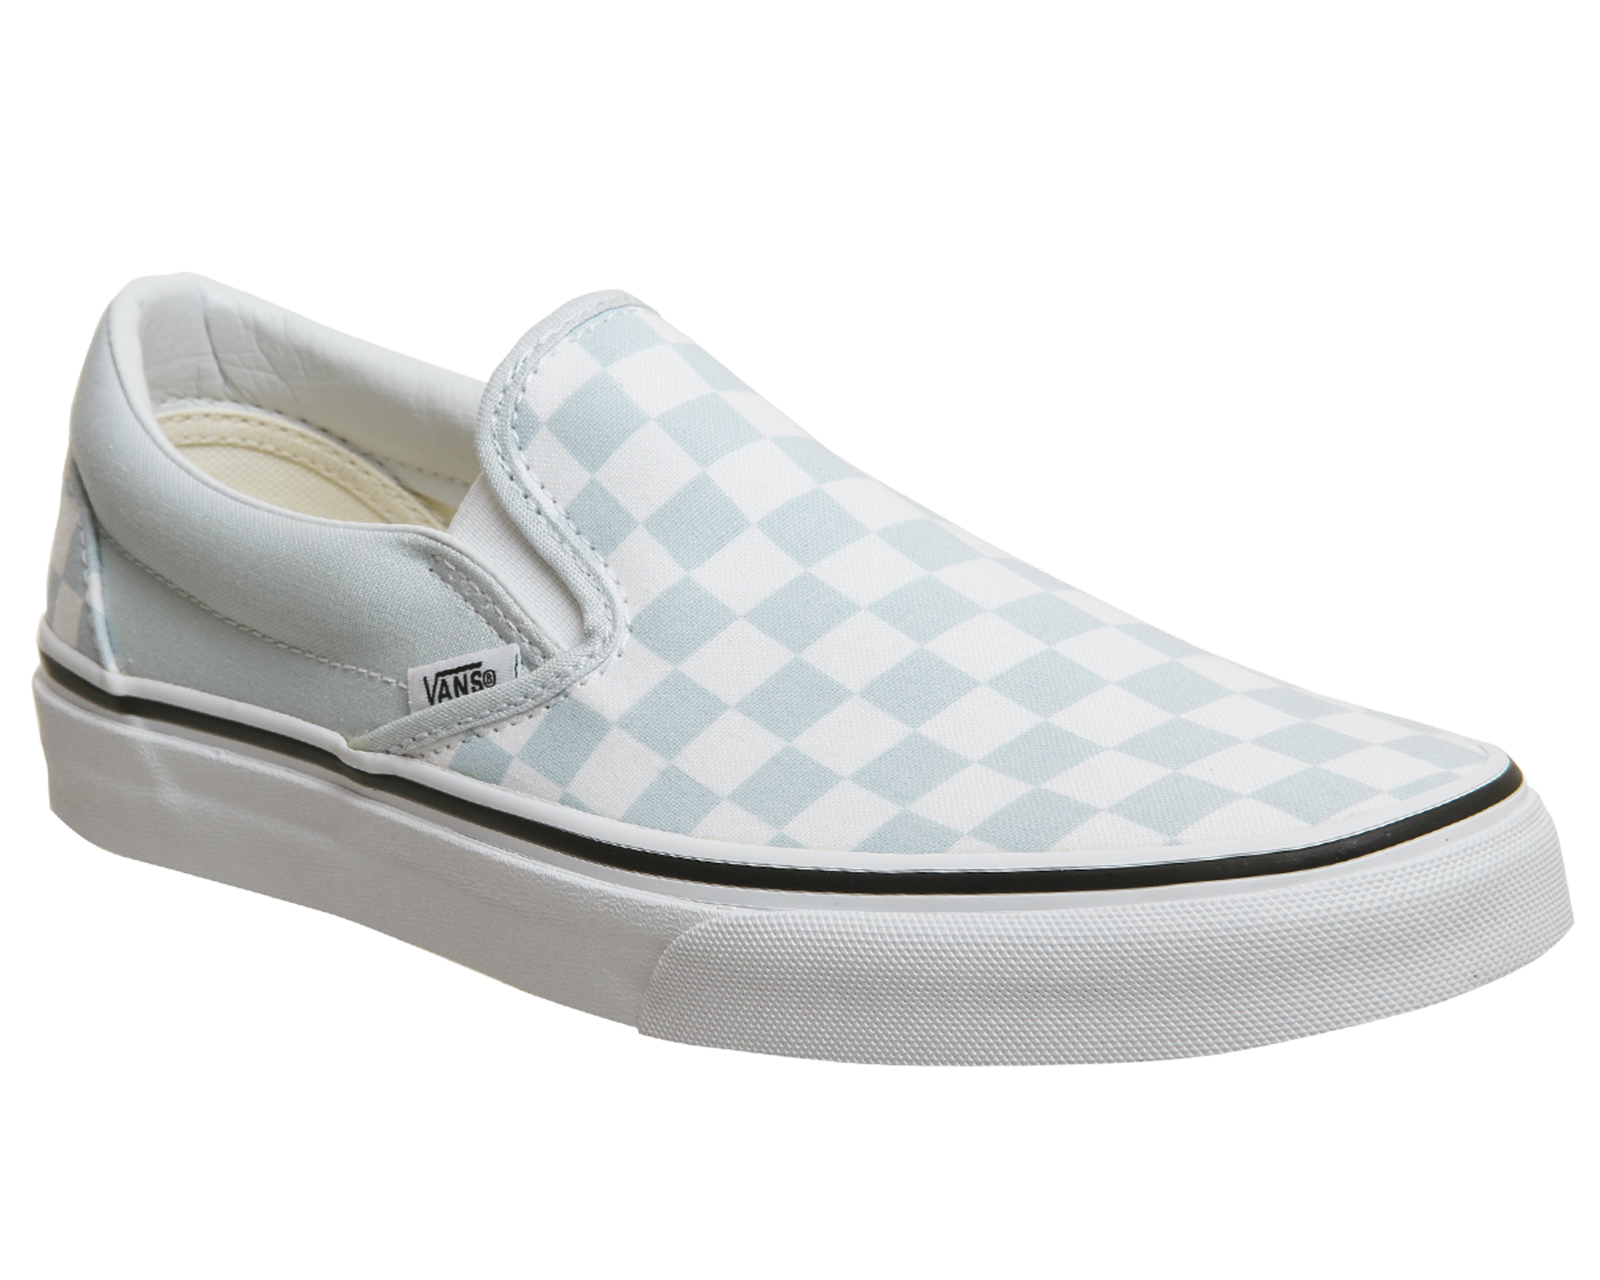 Vans Vans Classic Slip On Trainers Baby Blue White Checkerboard - Hers  trainers